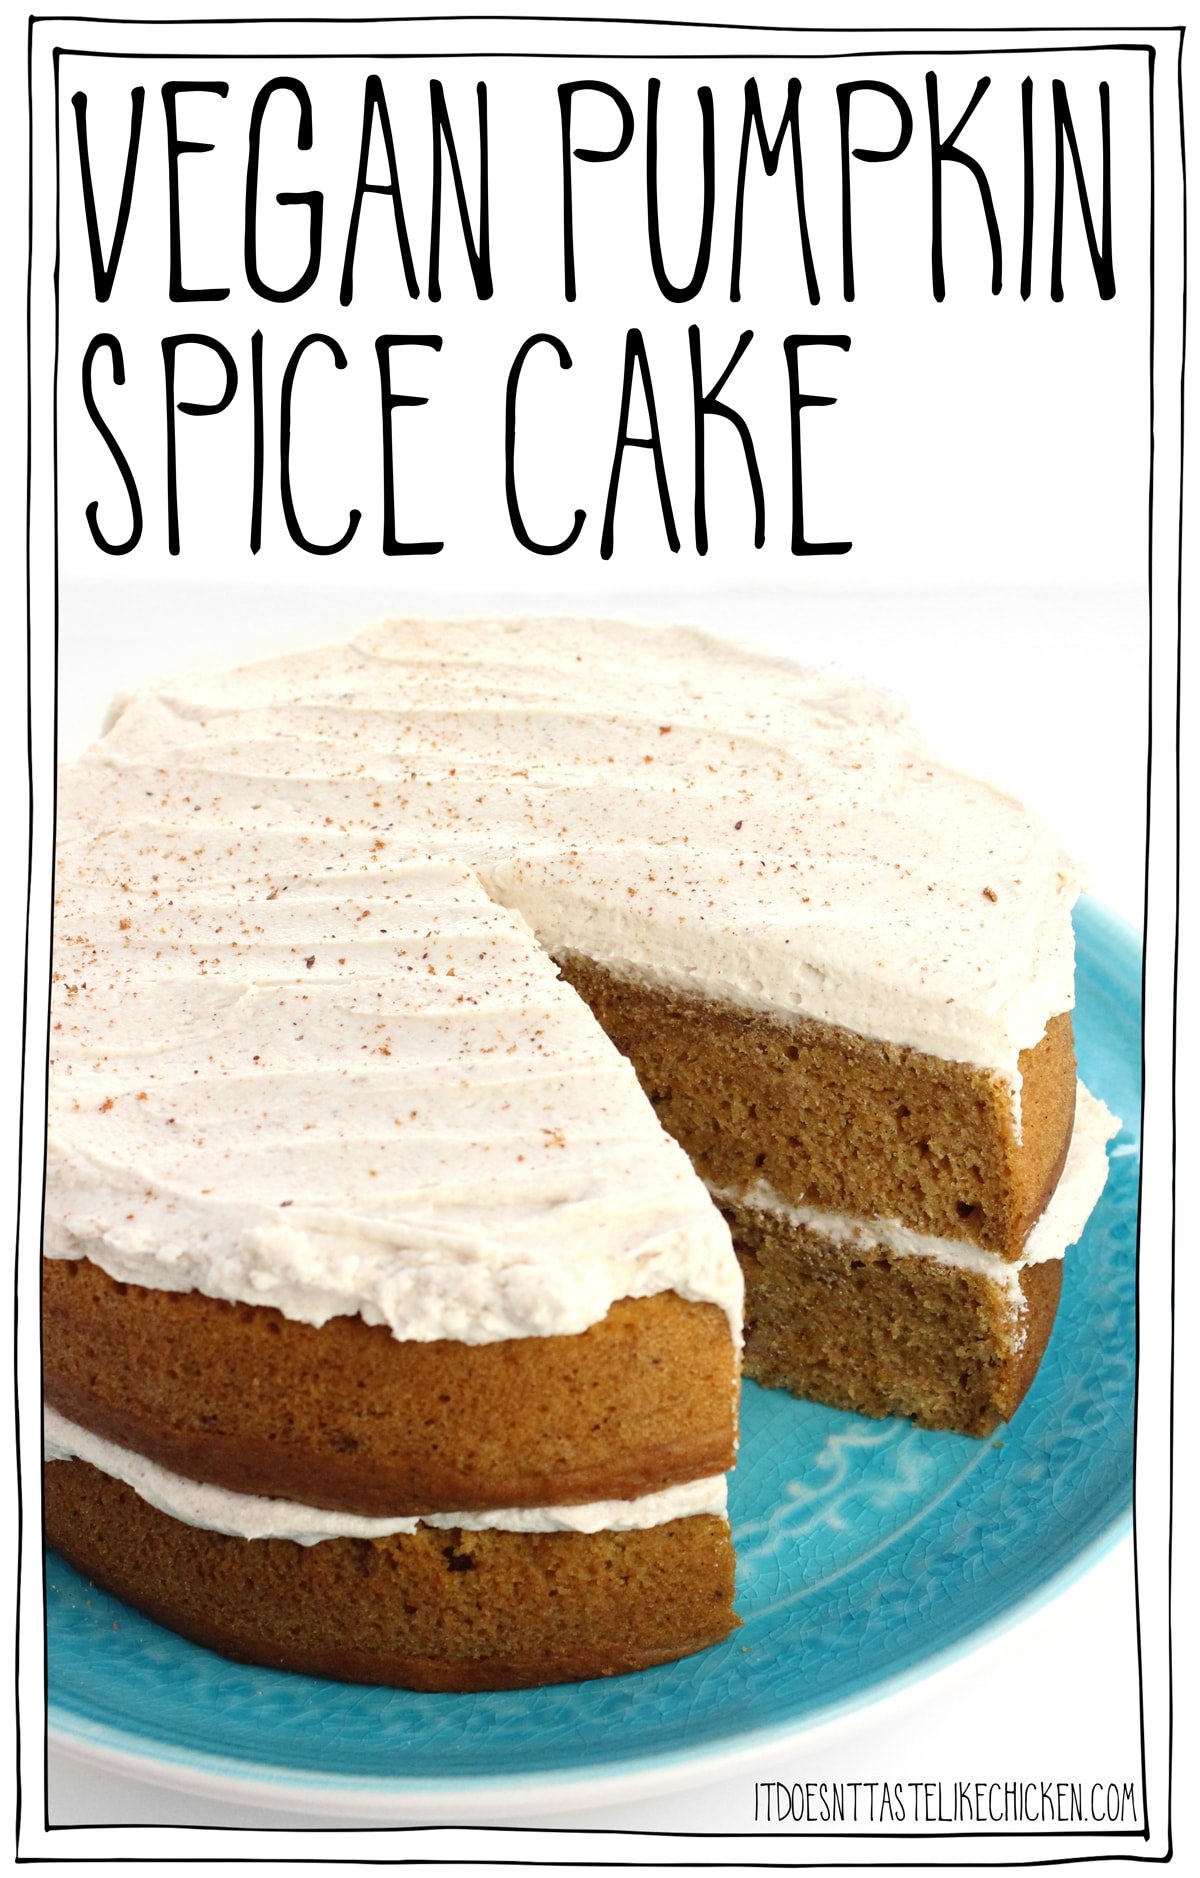 Vegan Pumpkin Spice Cake! This easy to make, super moist cake is the perfect dessert for Thanksgiving or to welcome the autumn season. Spread with fluffy pumpkin spice frosting or serve without. Dairy-free, egg-free. #itdoesnttastelikechicken